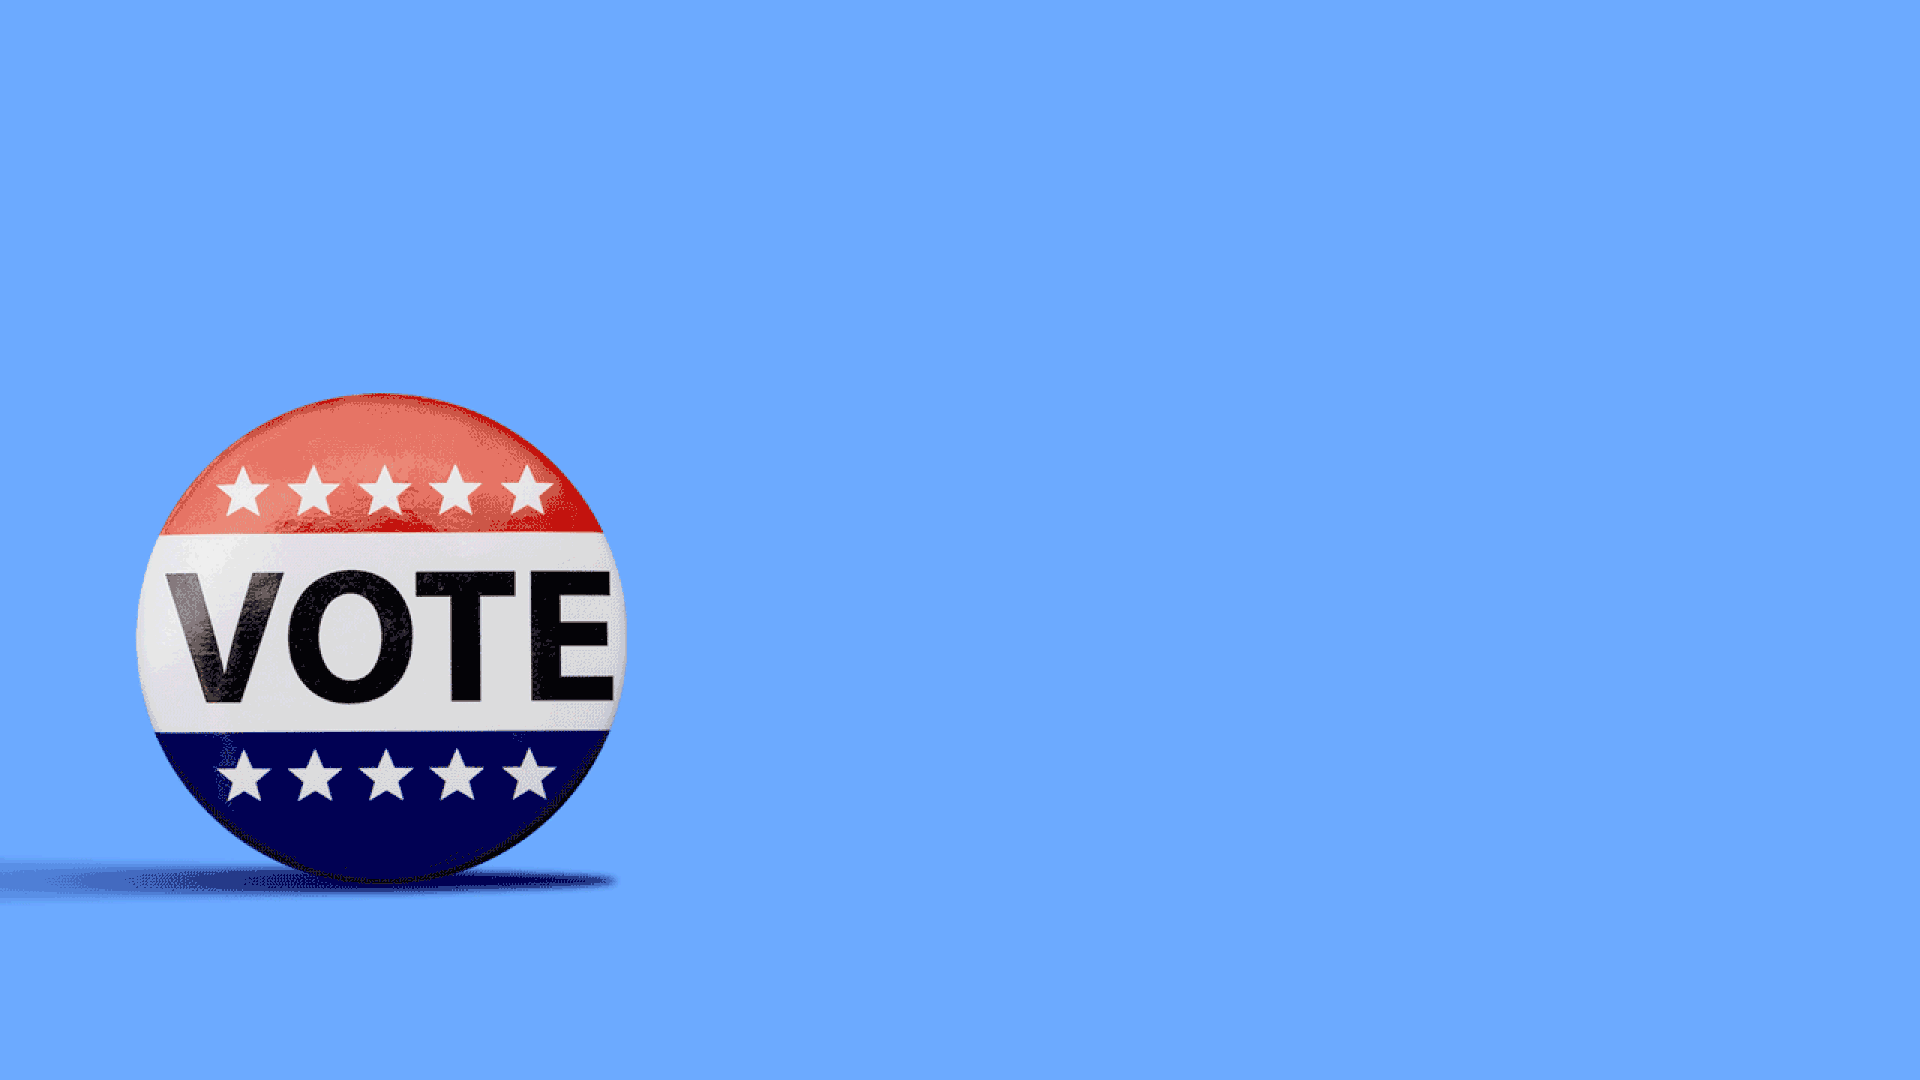 Animated illustration of a finger pushing a "VOTE" button from the left of the screen towards the center